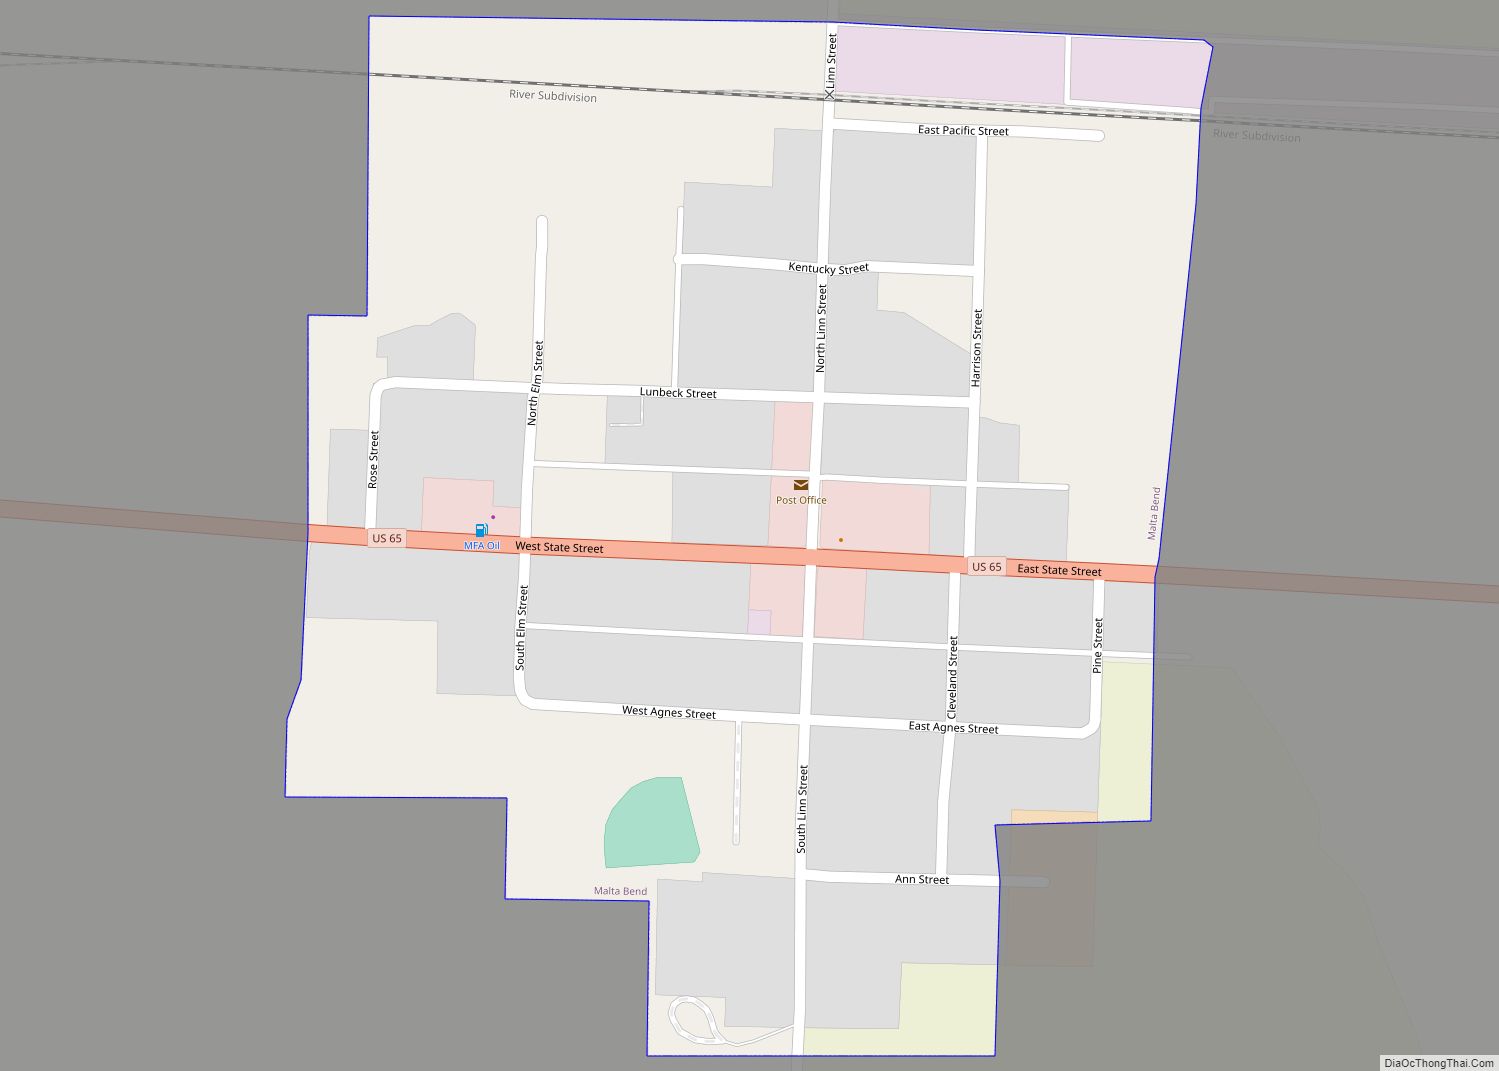 Map of Malta Bend town